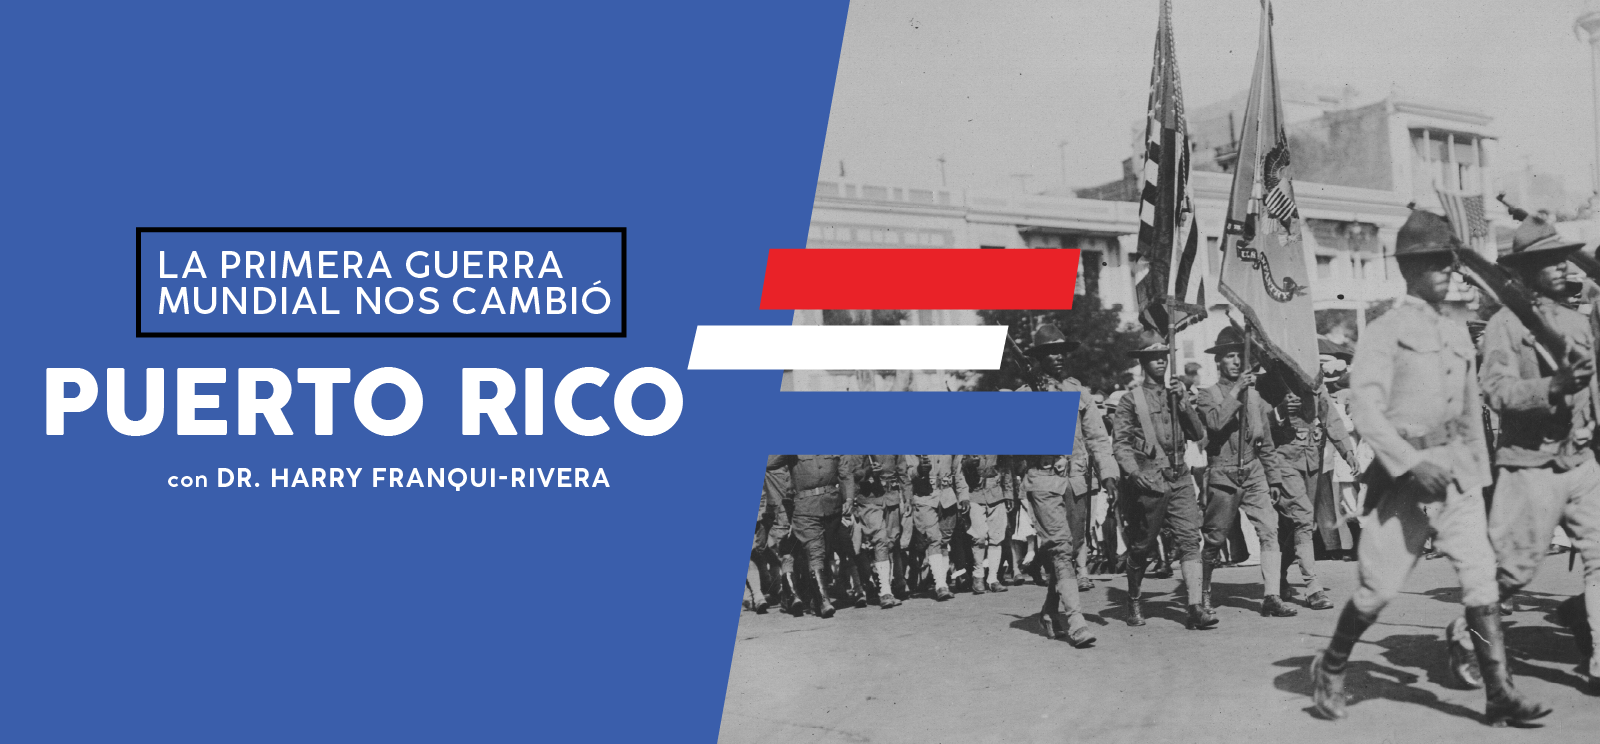 Black and white photo of soldiers marching down a street. Text: La Primera Guerra Mundial Nos Cambió / Puerto Rico / con Dr. Harry Franqui-Rivera